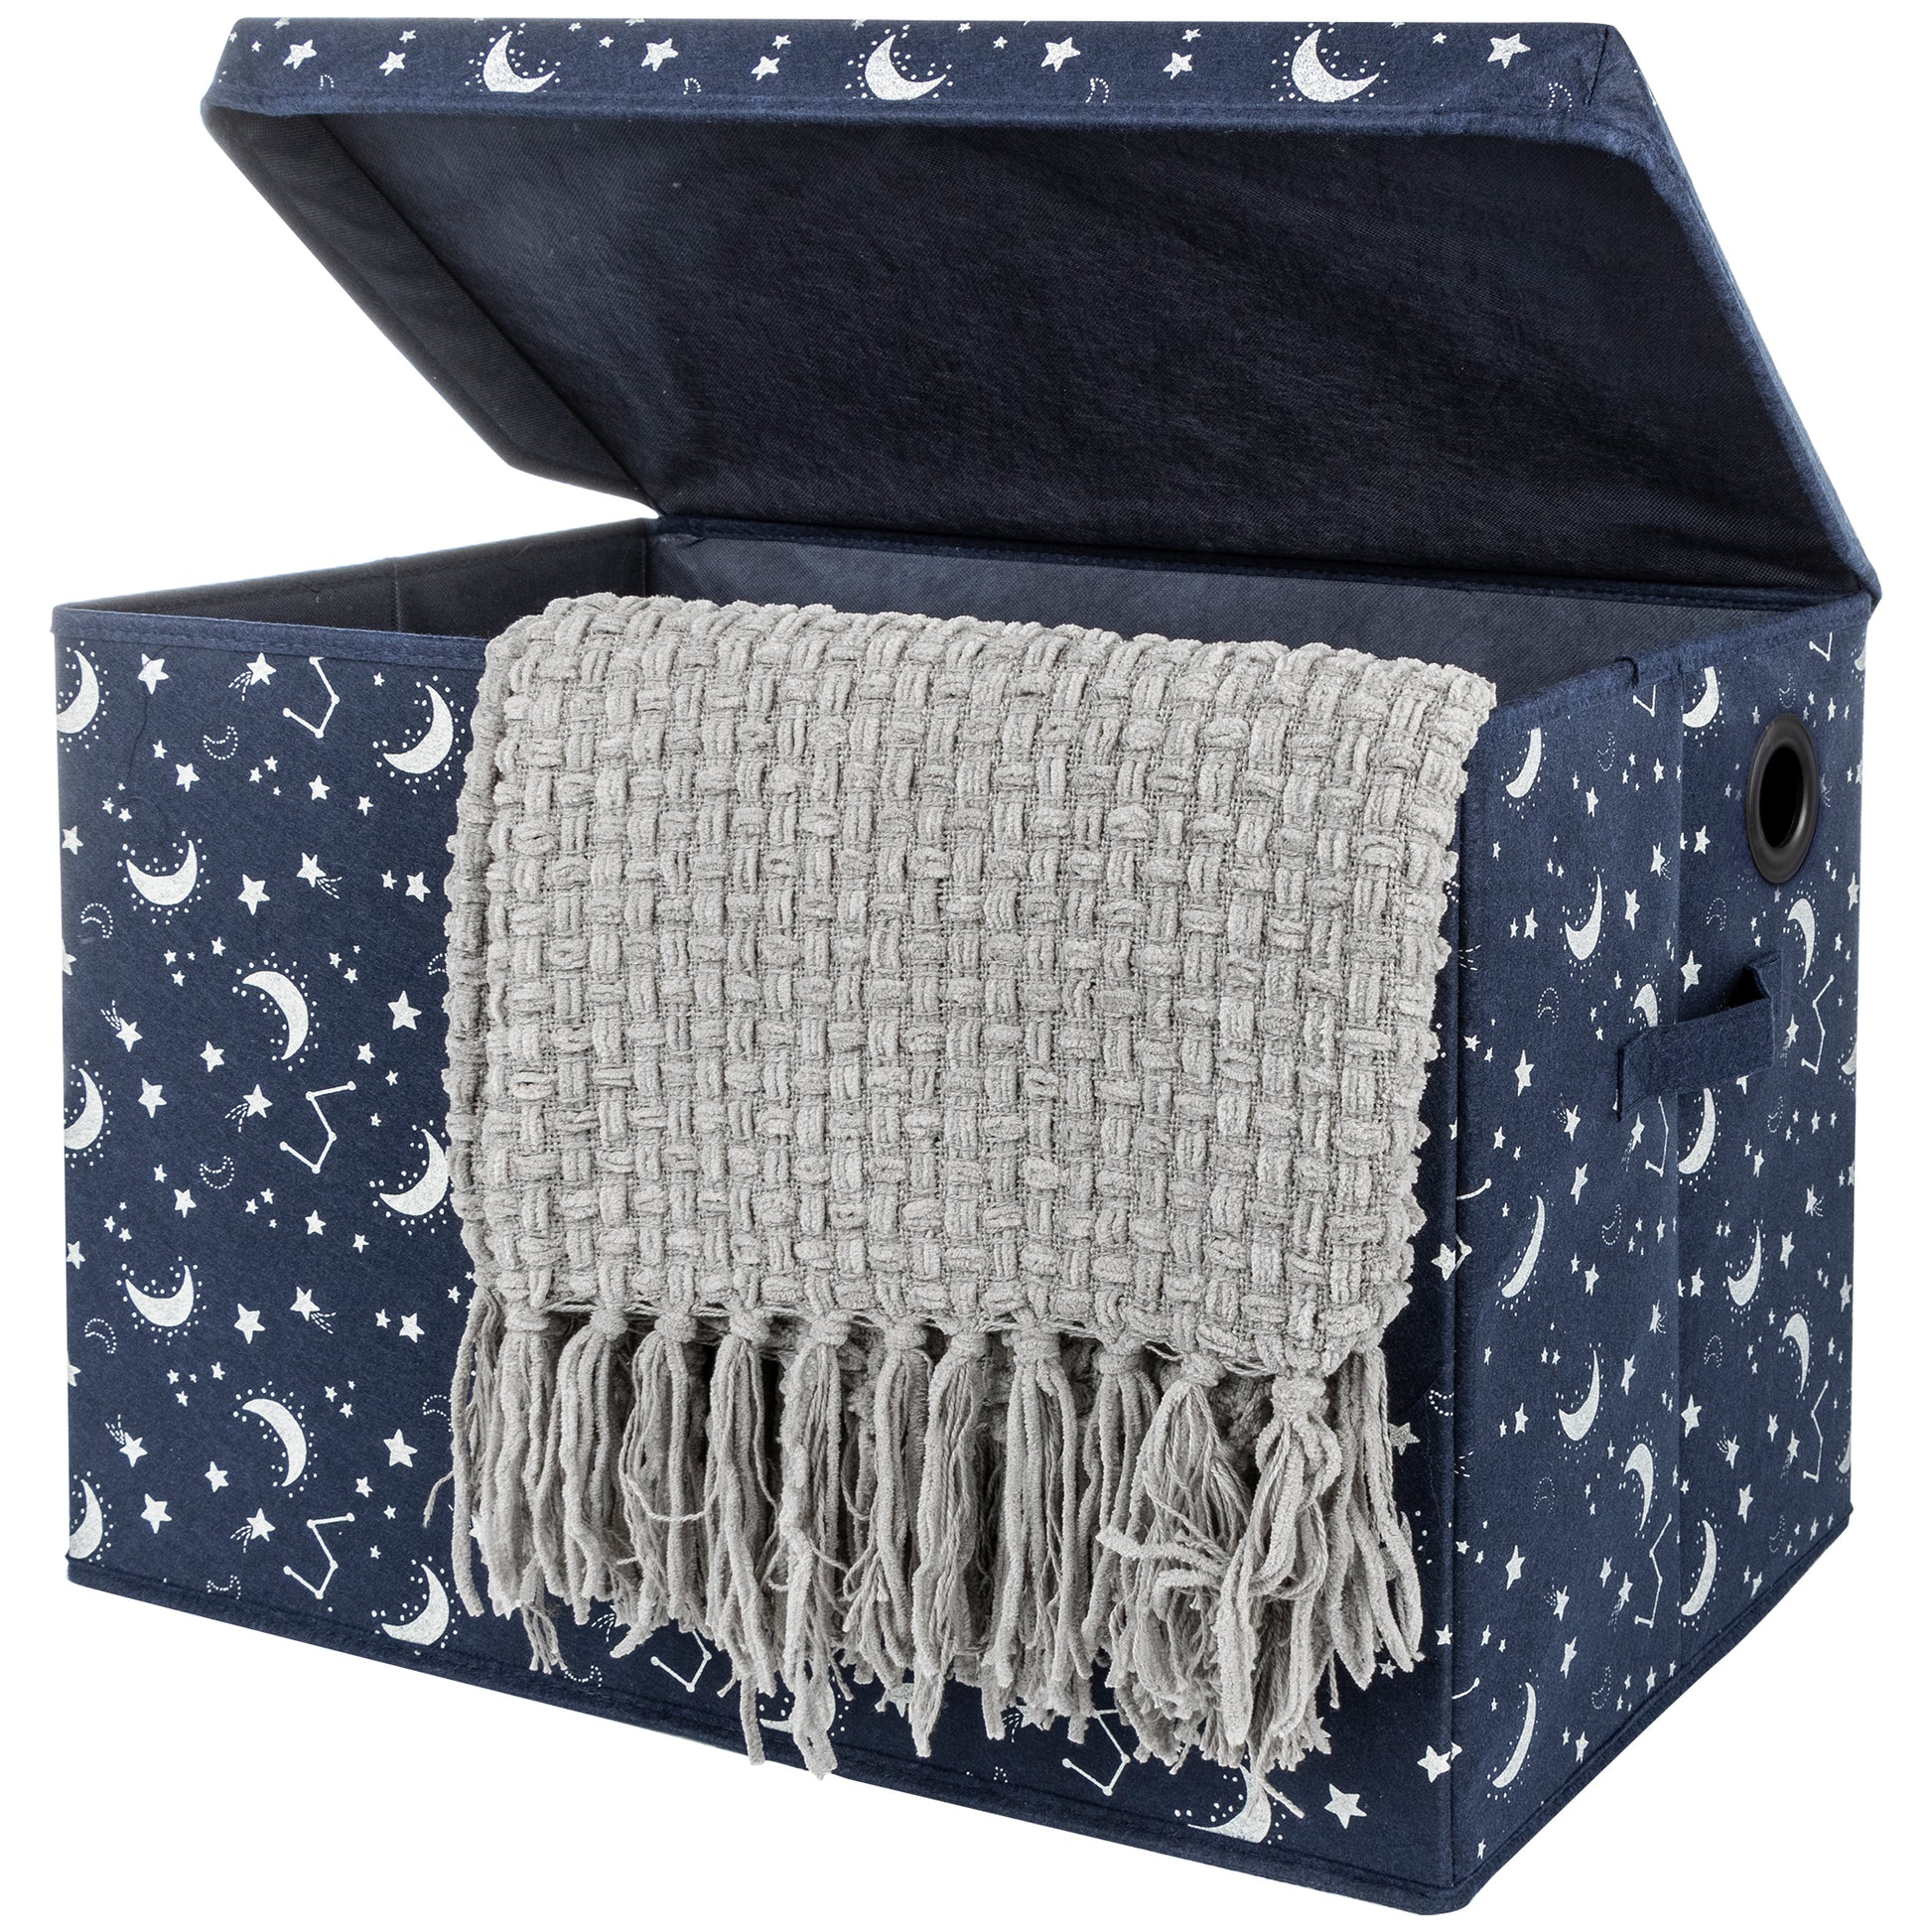 Constellation Felt Toy Box by Sammy & Lou® Angled with lid open with gray blanket peeking out